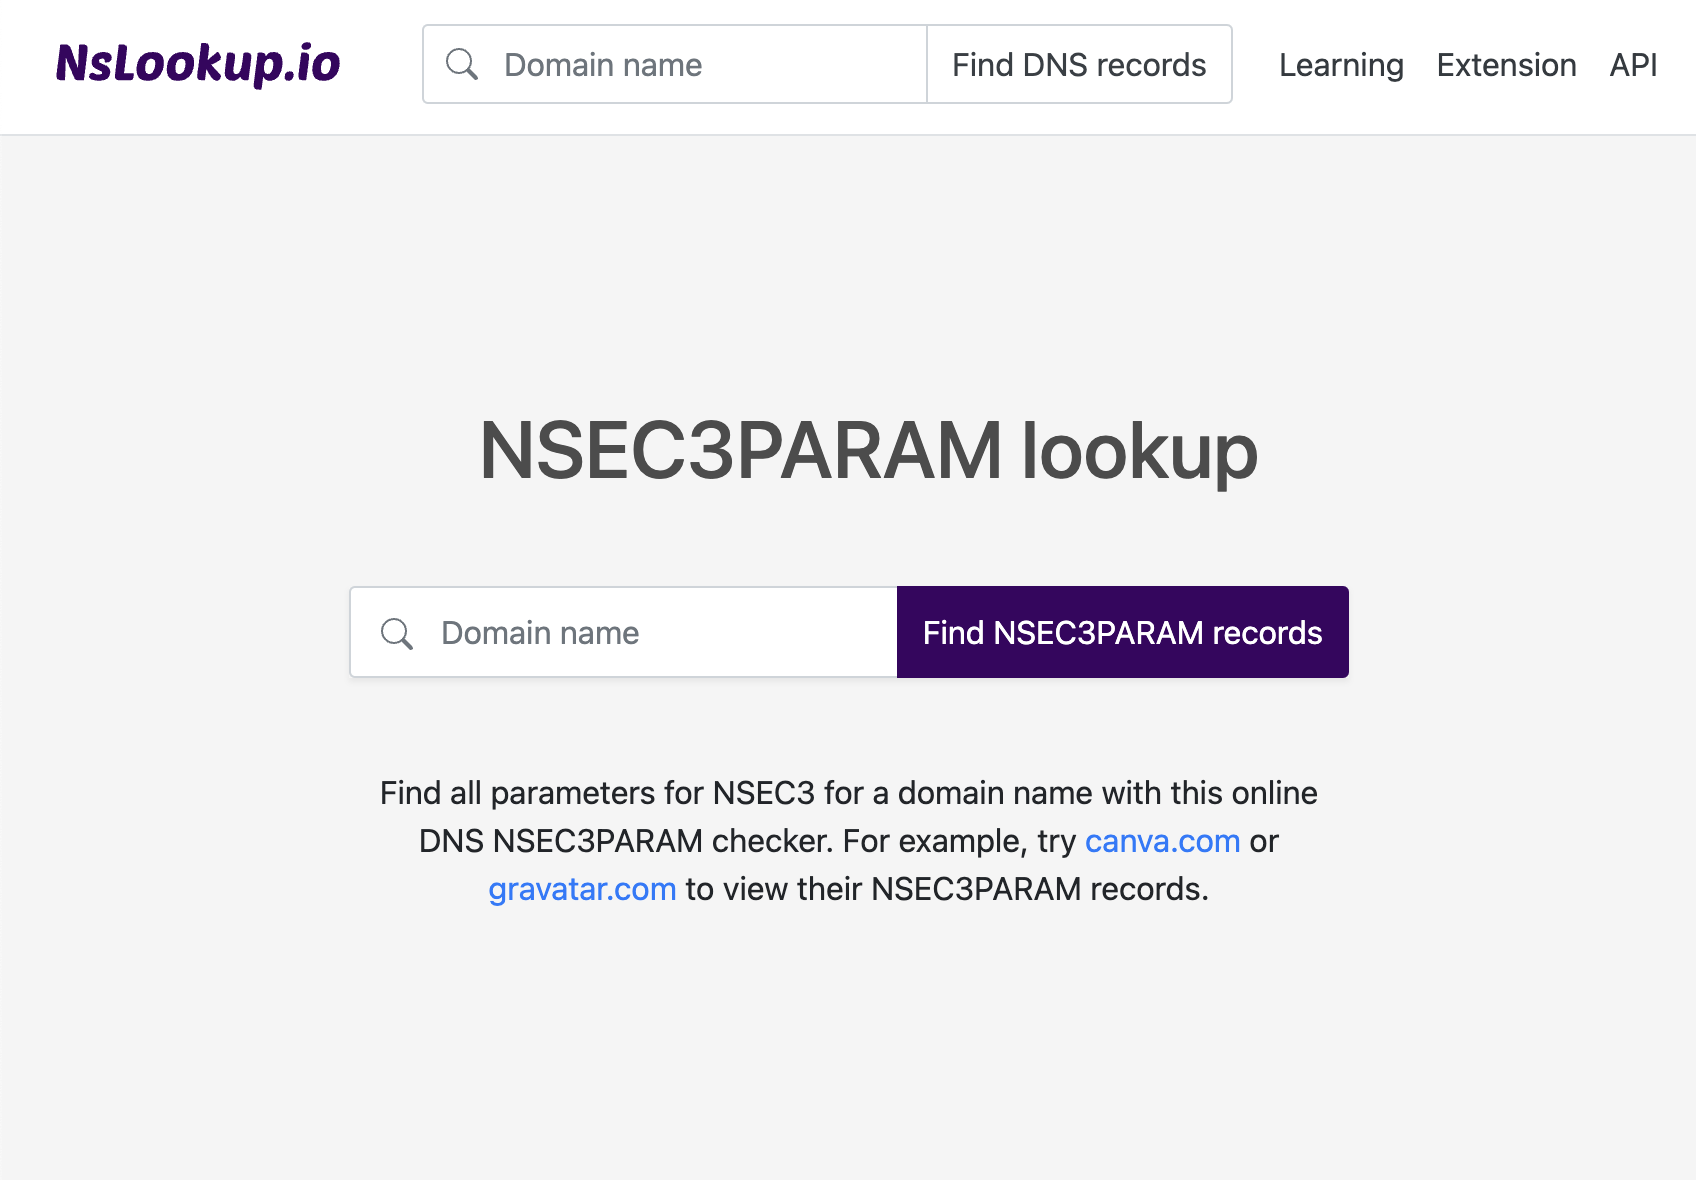 Open the NSEC3PARAM lookup tool